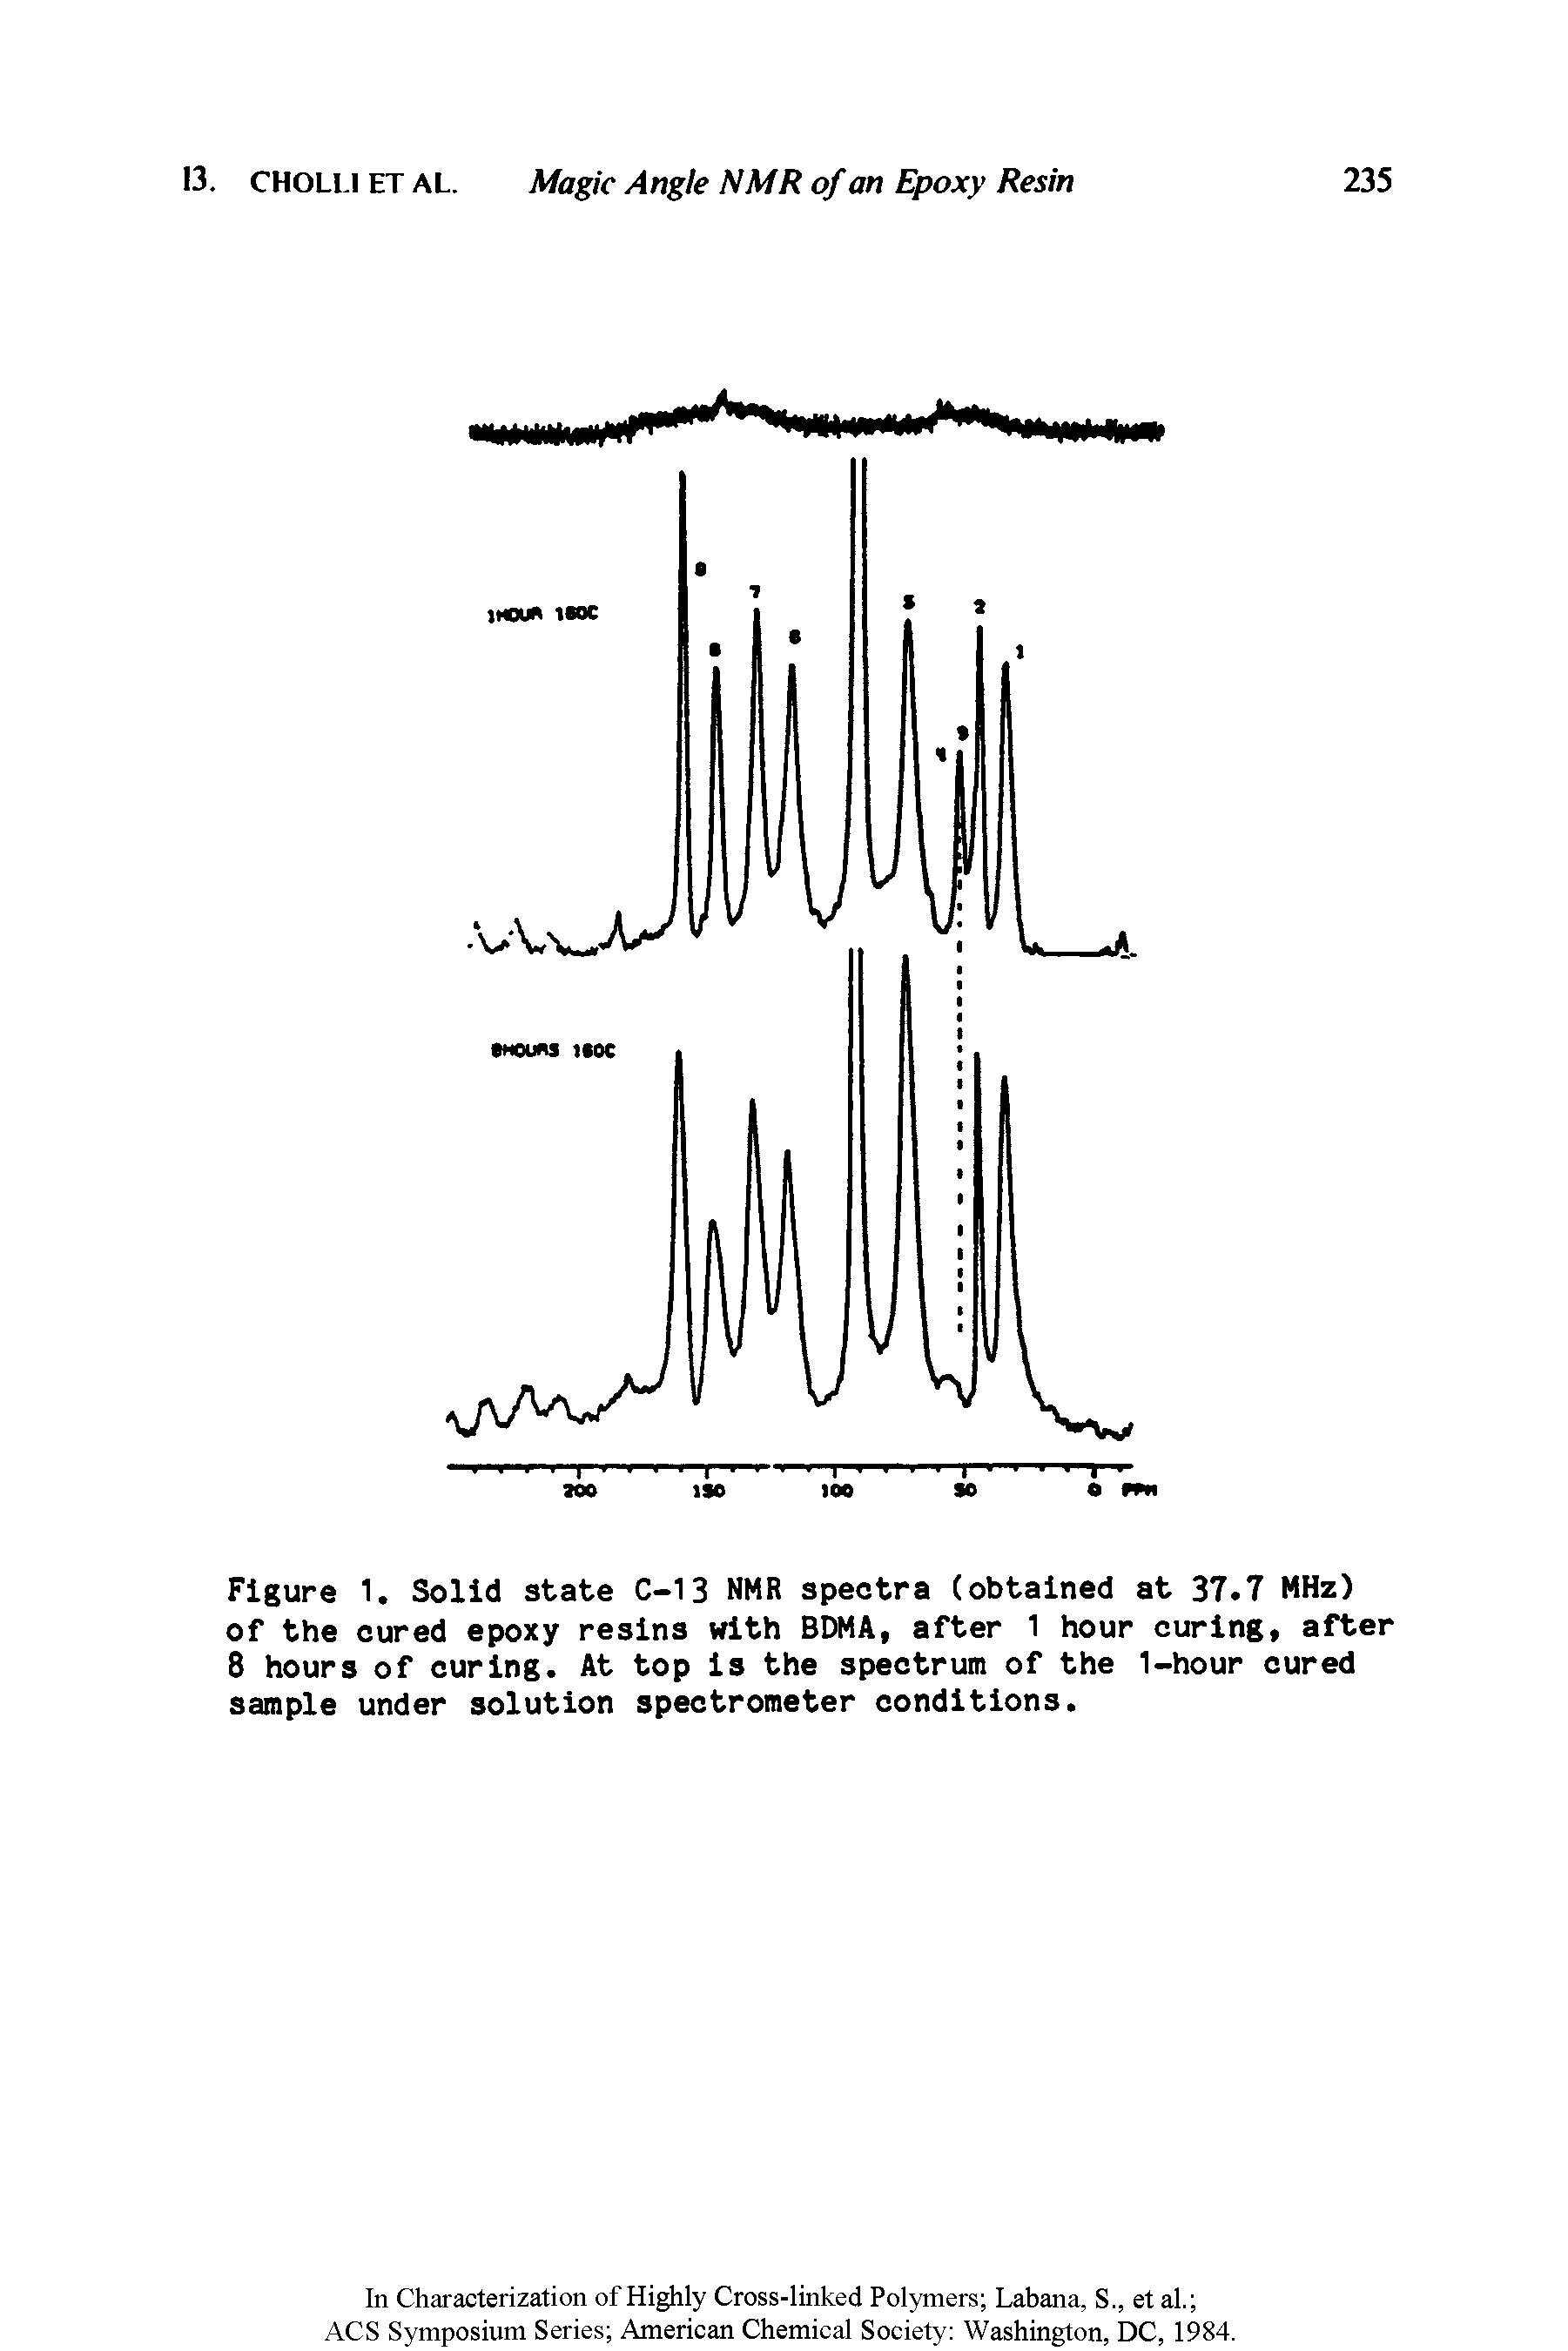 Figure 1, Solid state C-13 NMR spectra (obtained at 37.7 MHz) of the cured epoxy resins with BDMA, after 1 hour curing, after 8 hours of curing. At top is the spectrum of the 1-hour cured sample under solution spectrometer conditions.